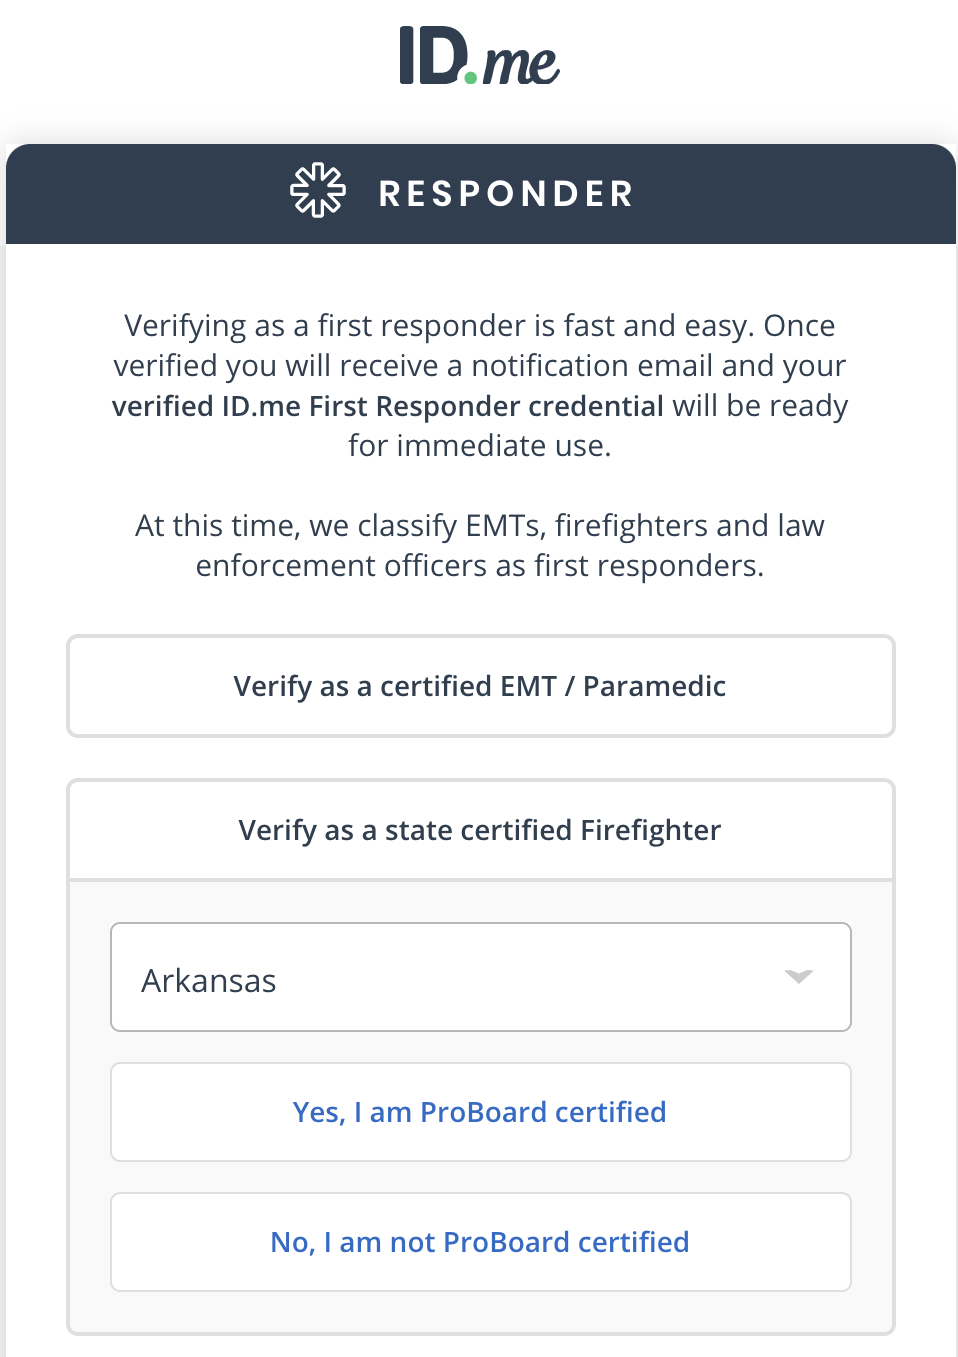 RESPONDER Verifying as a first responder is fast and easy. Once verified you will recieve a notification email and your verified ID.me First Responder credential will be available for immediate use.png